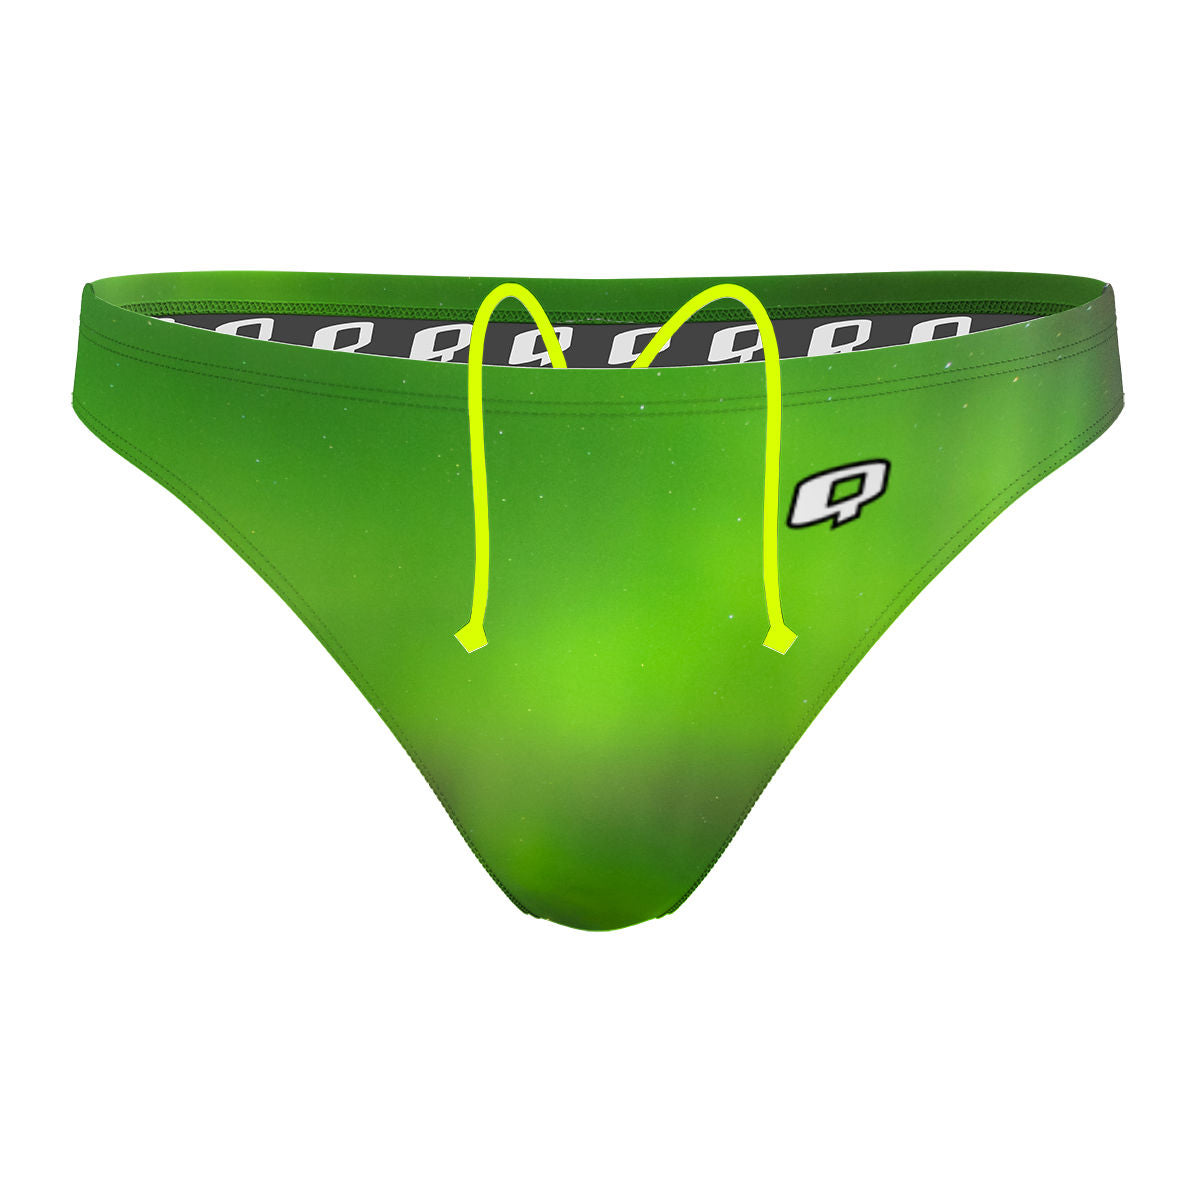 05/30/2022 - Waterpolo Brief Swimsuit